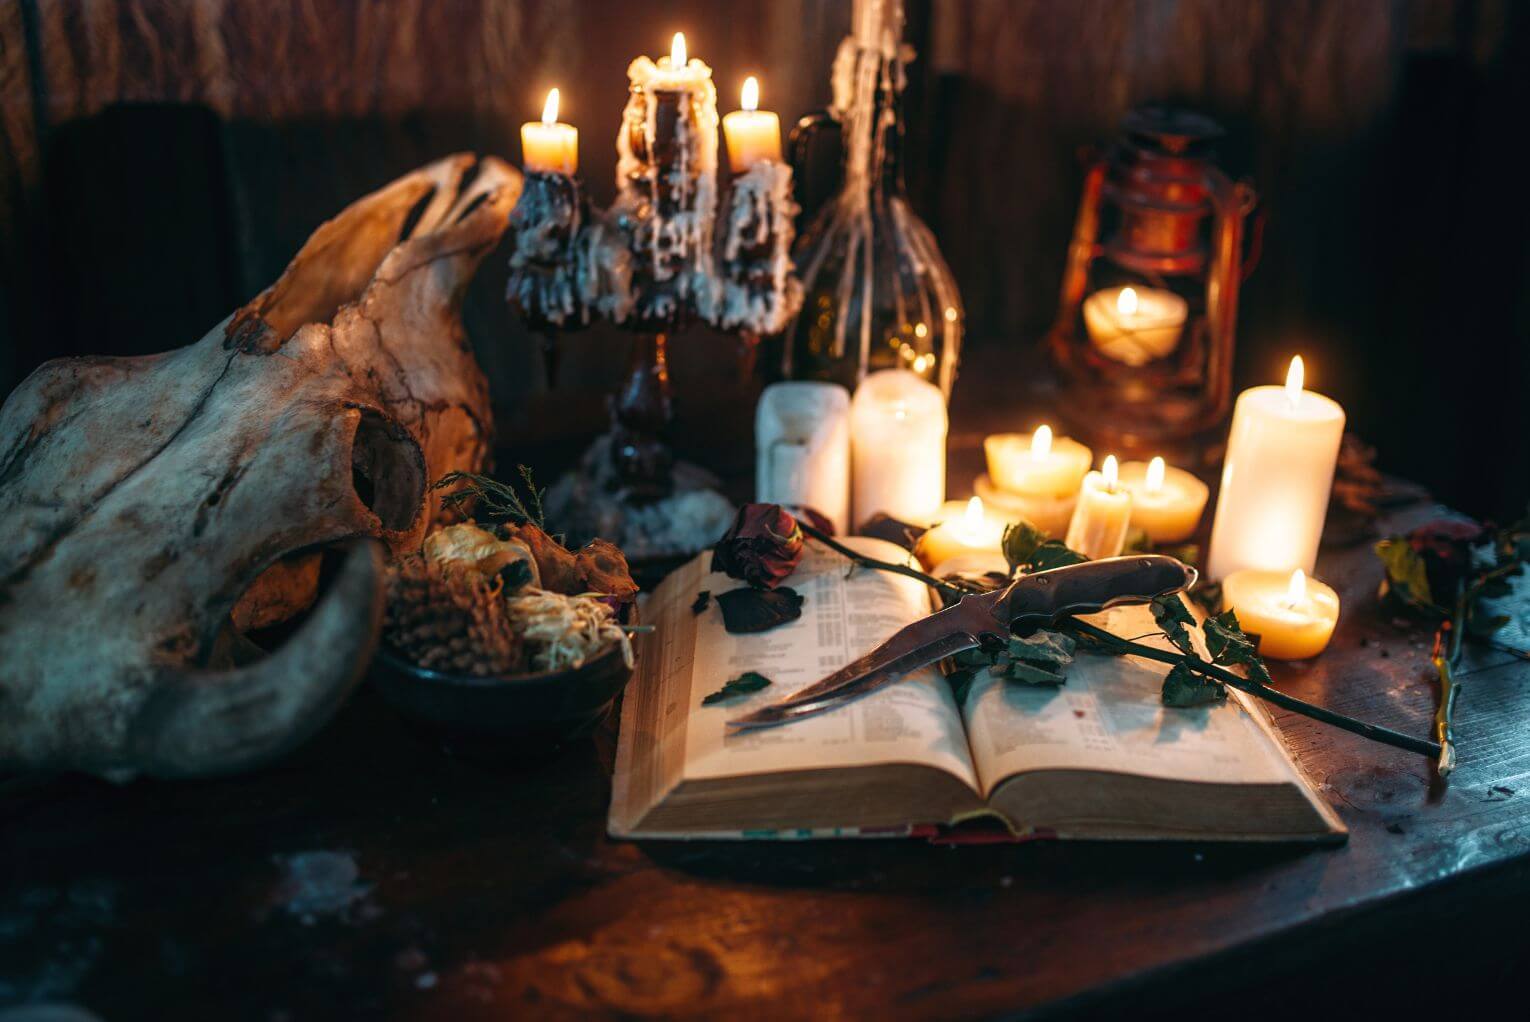 4 More Signs of Witchcraft Practices in Church